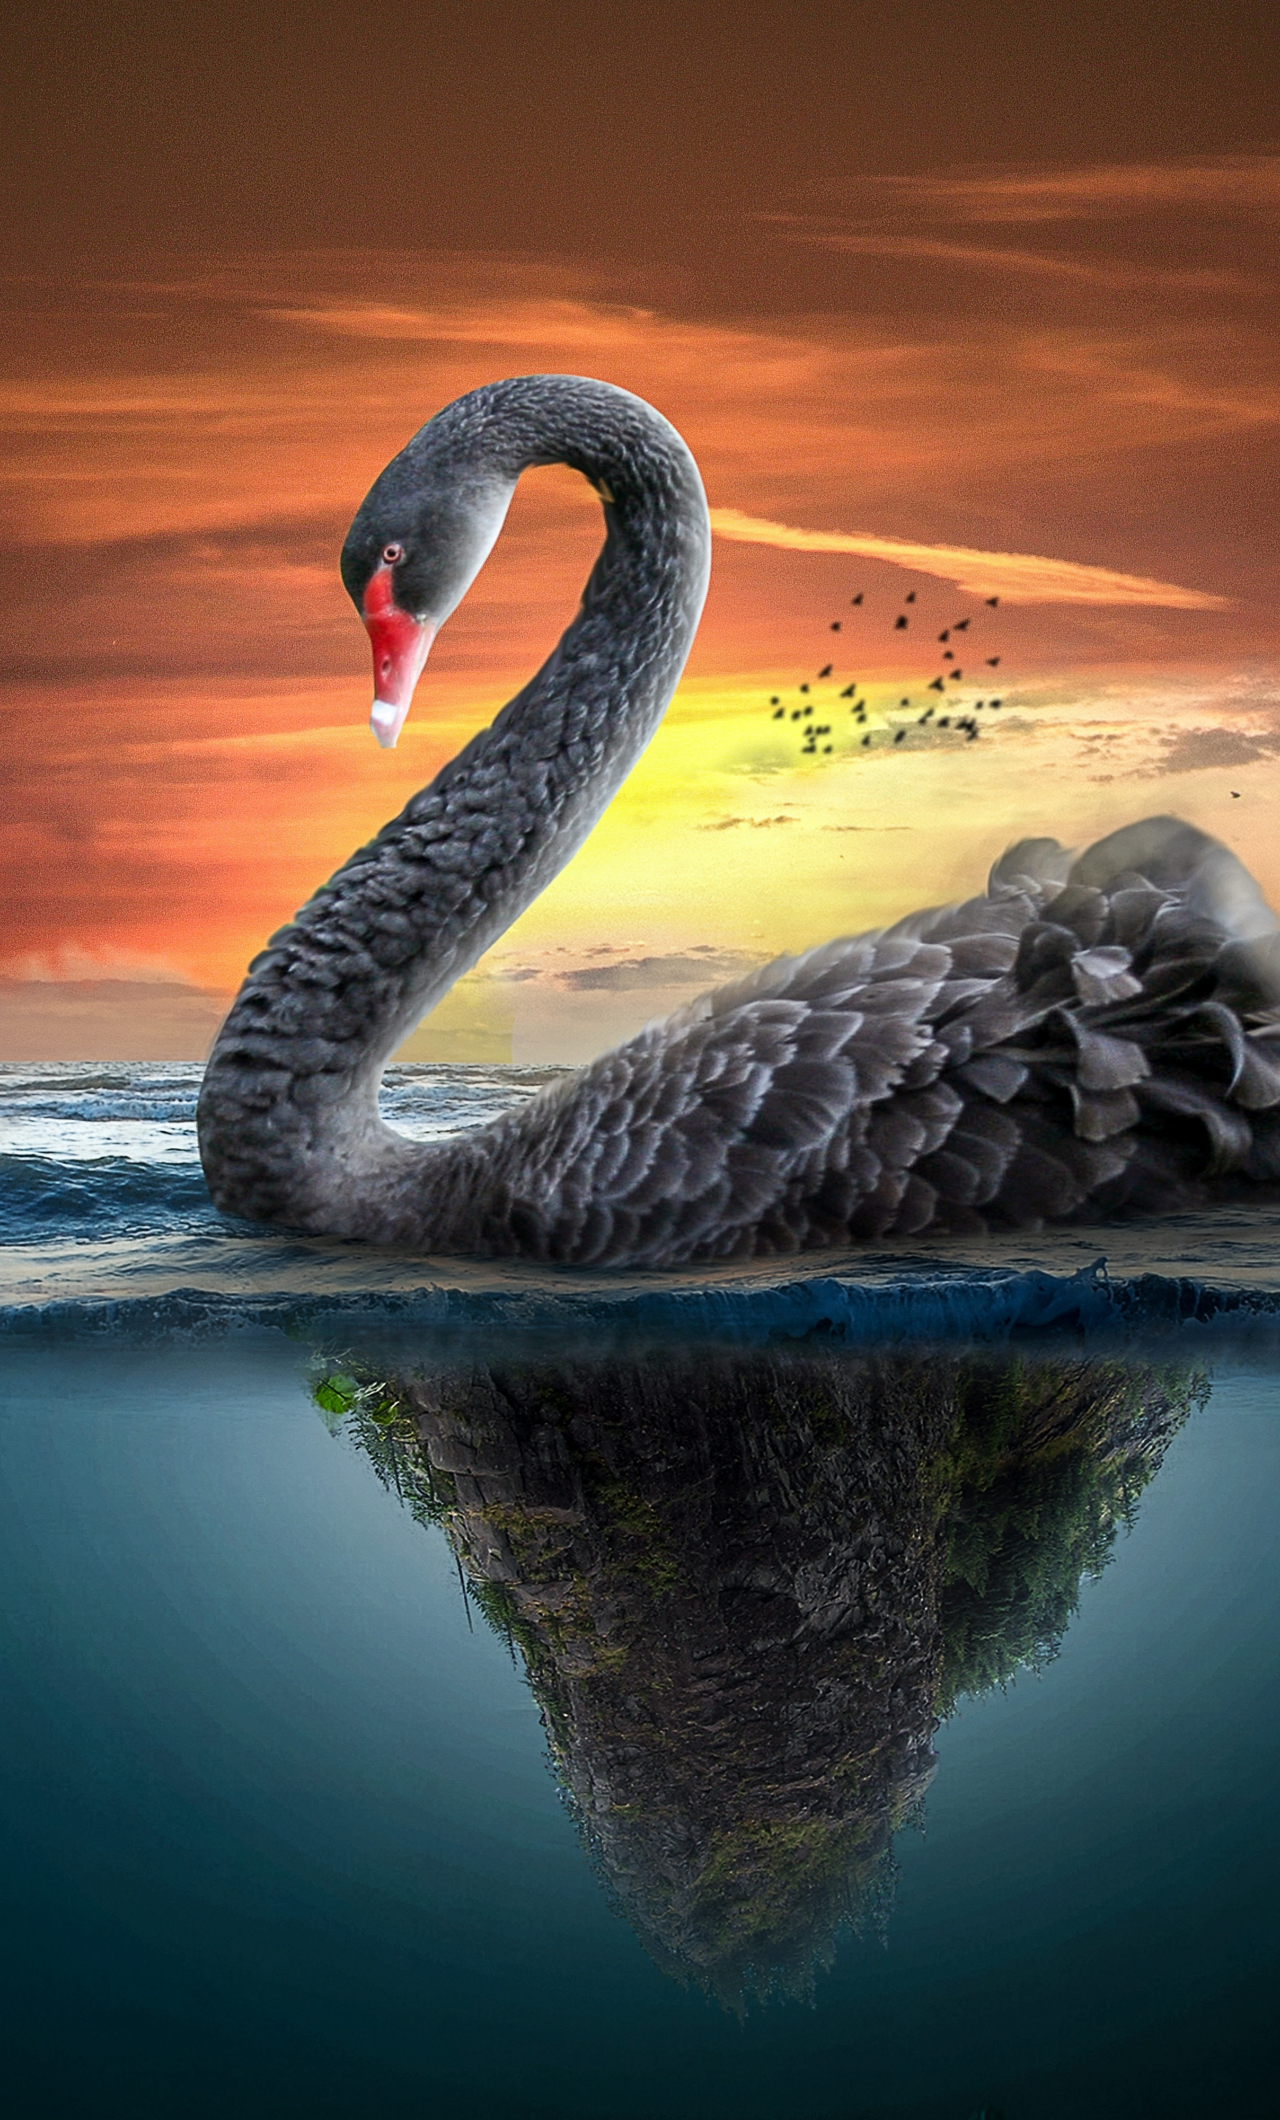 Swan in Mountain Lake Wallpaper  iPhone Android  Desktop Backgrounds